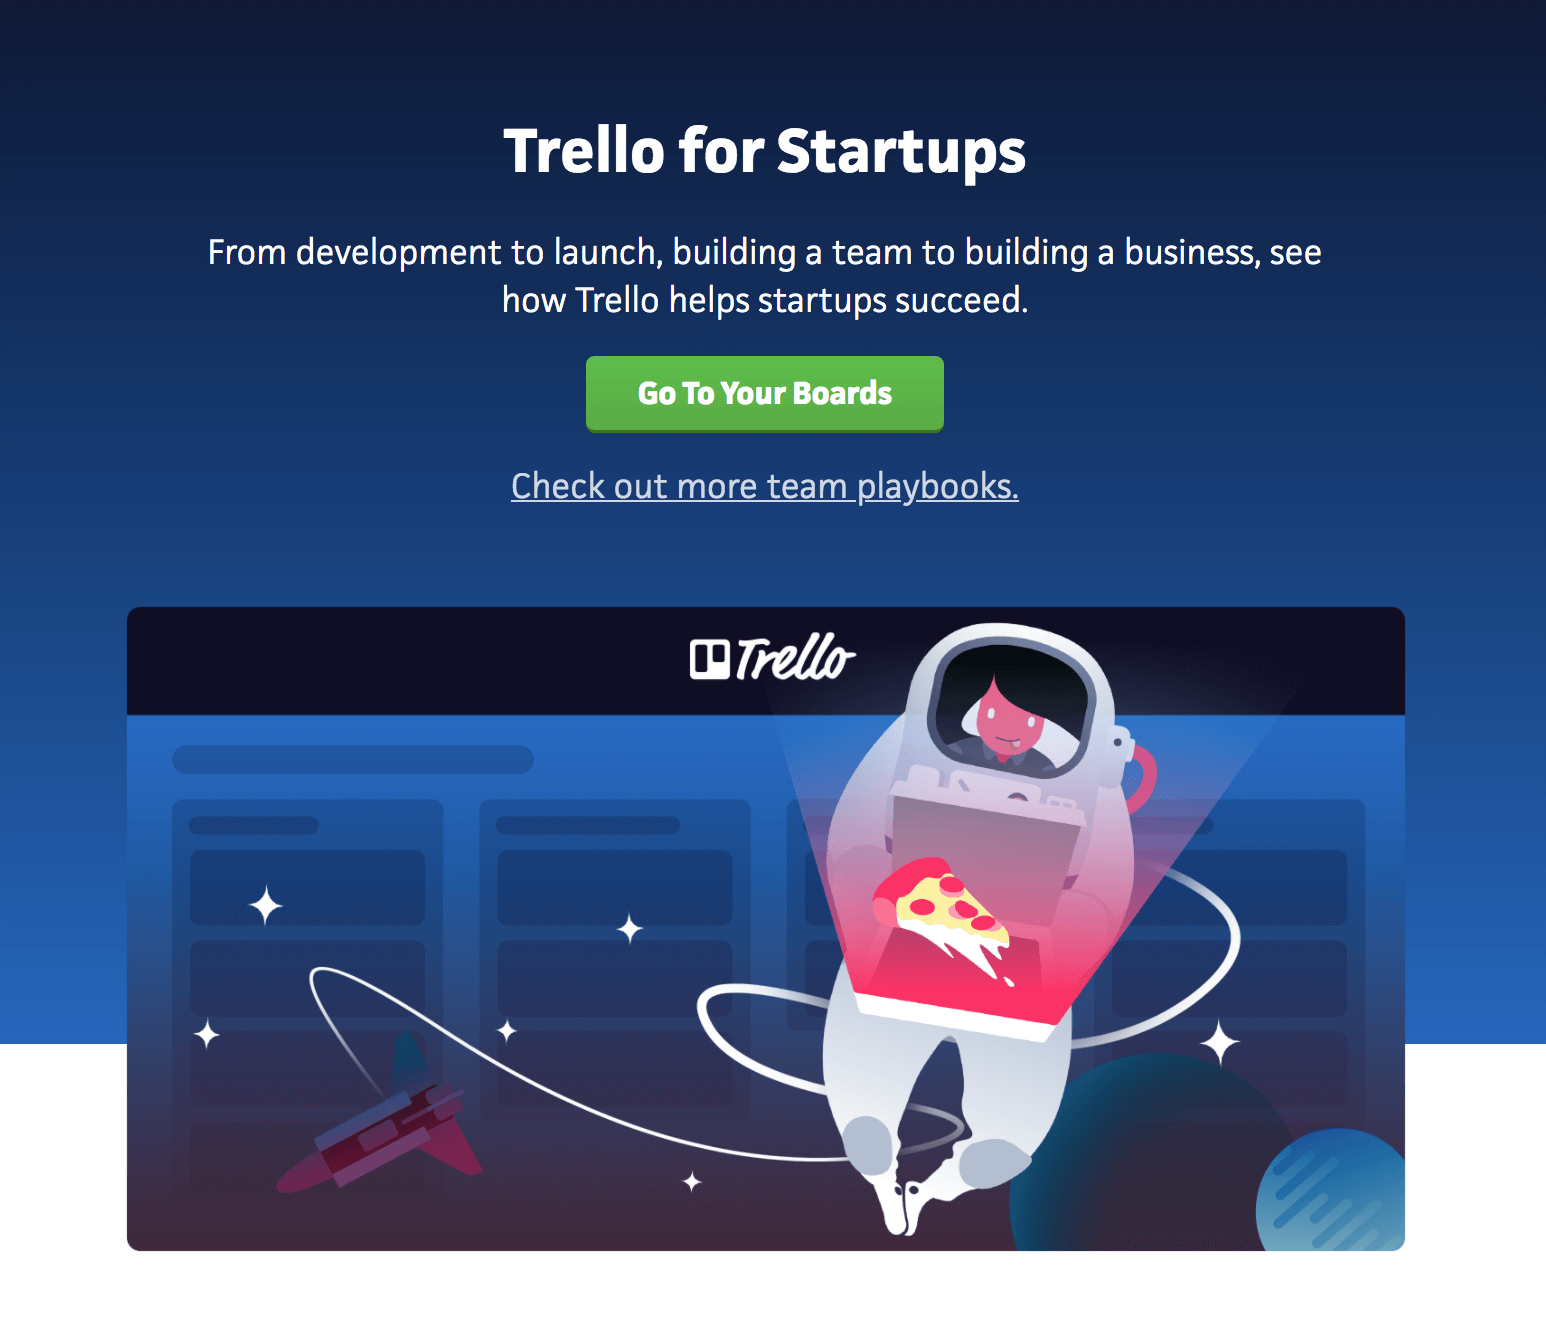 How to build a successful startup with the help of Trello